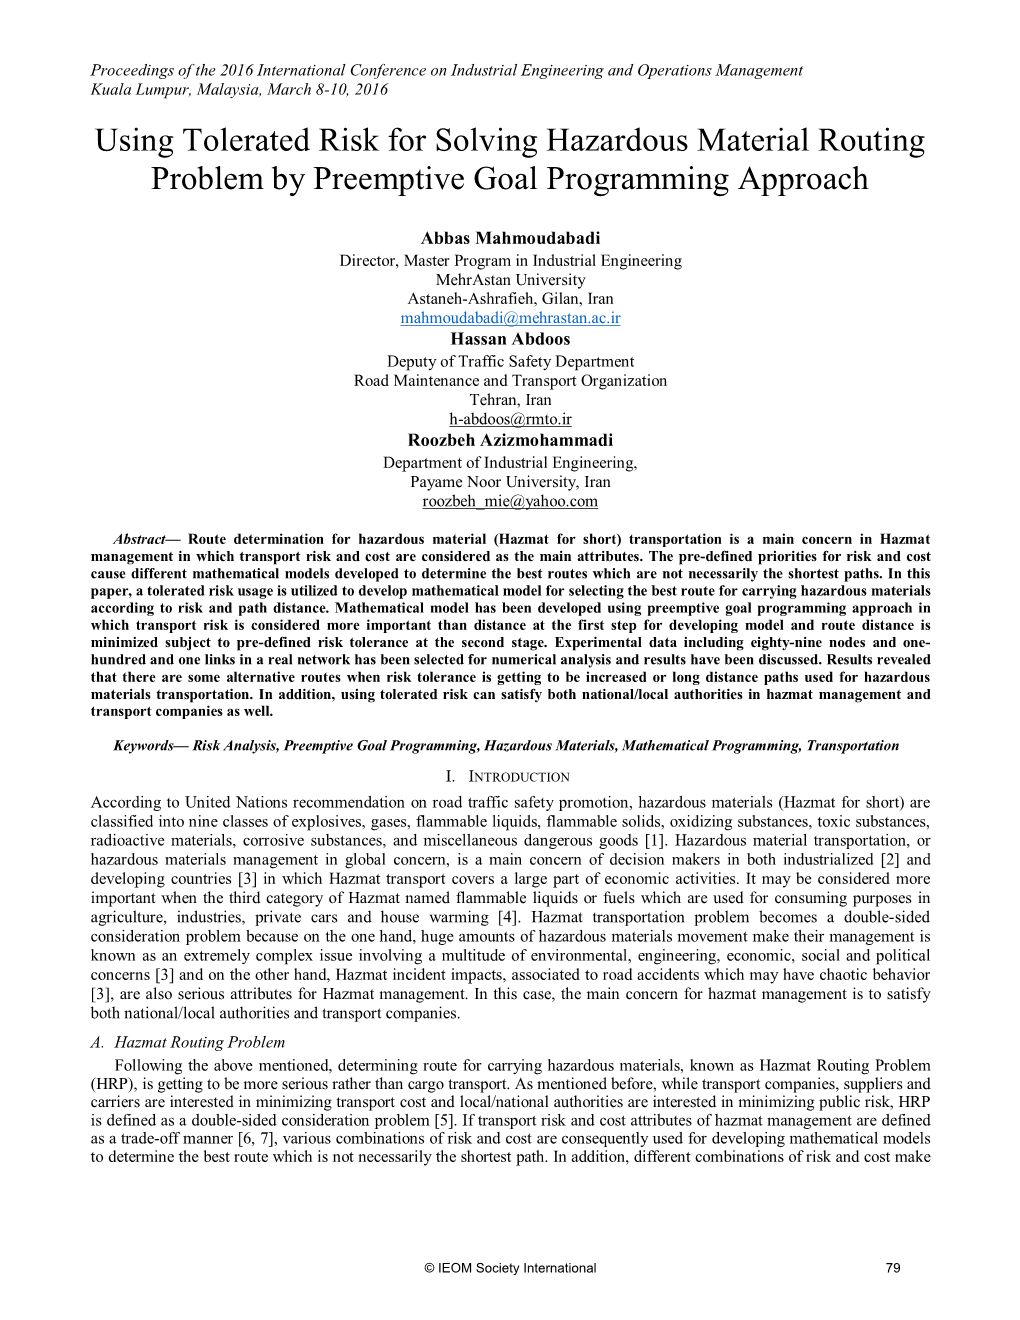 Using Tolerated Risk for Solving Hazardous Material Routing Problem by Preemptive Goal Programming Approach